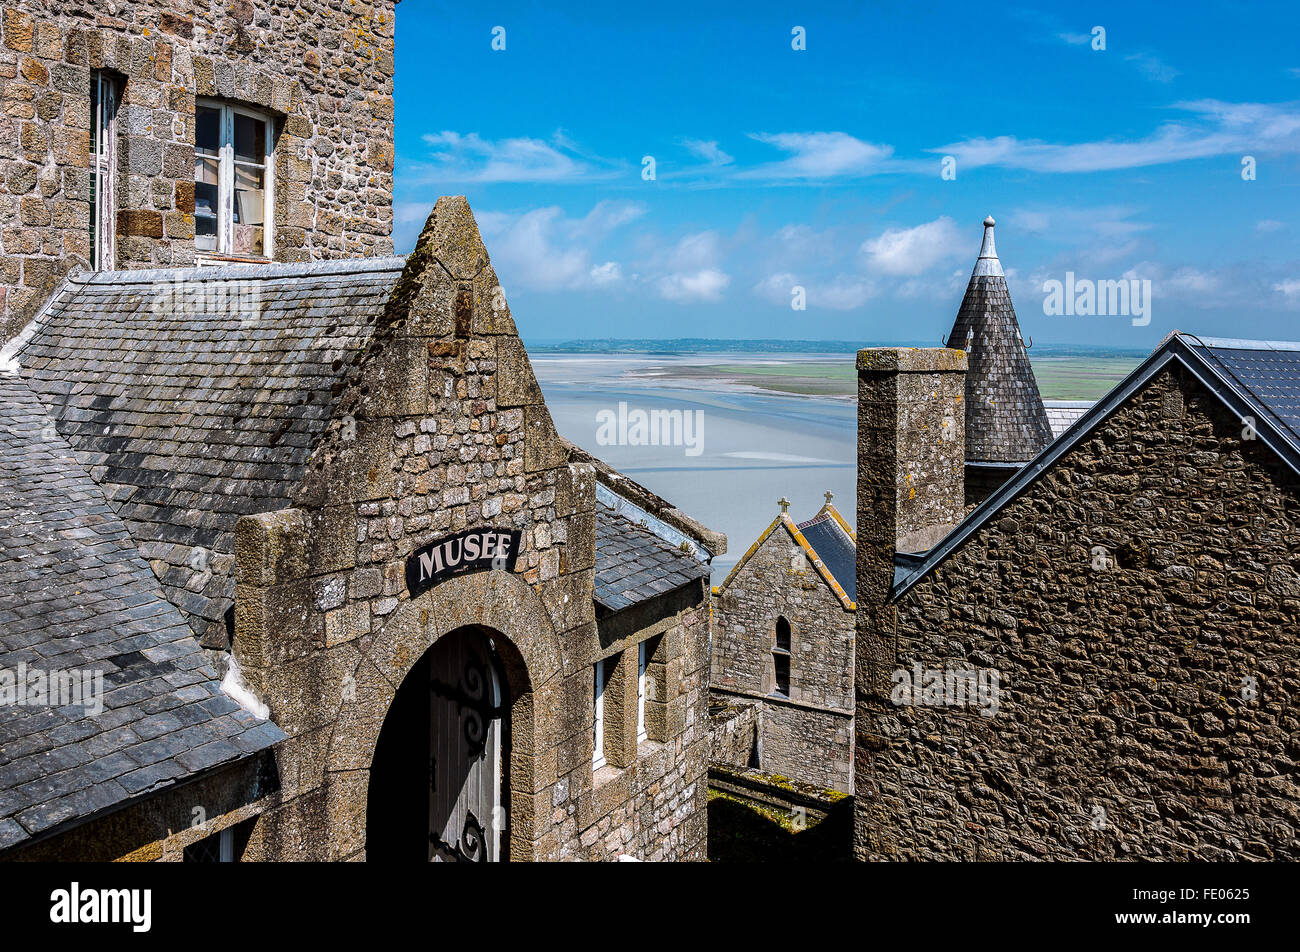 France, Normandy, the museum of the medieval village of Mont St Michel Stock Photo